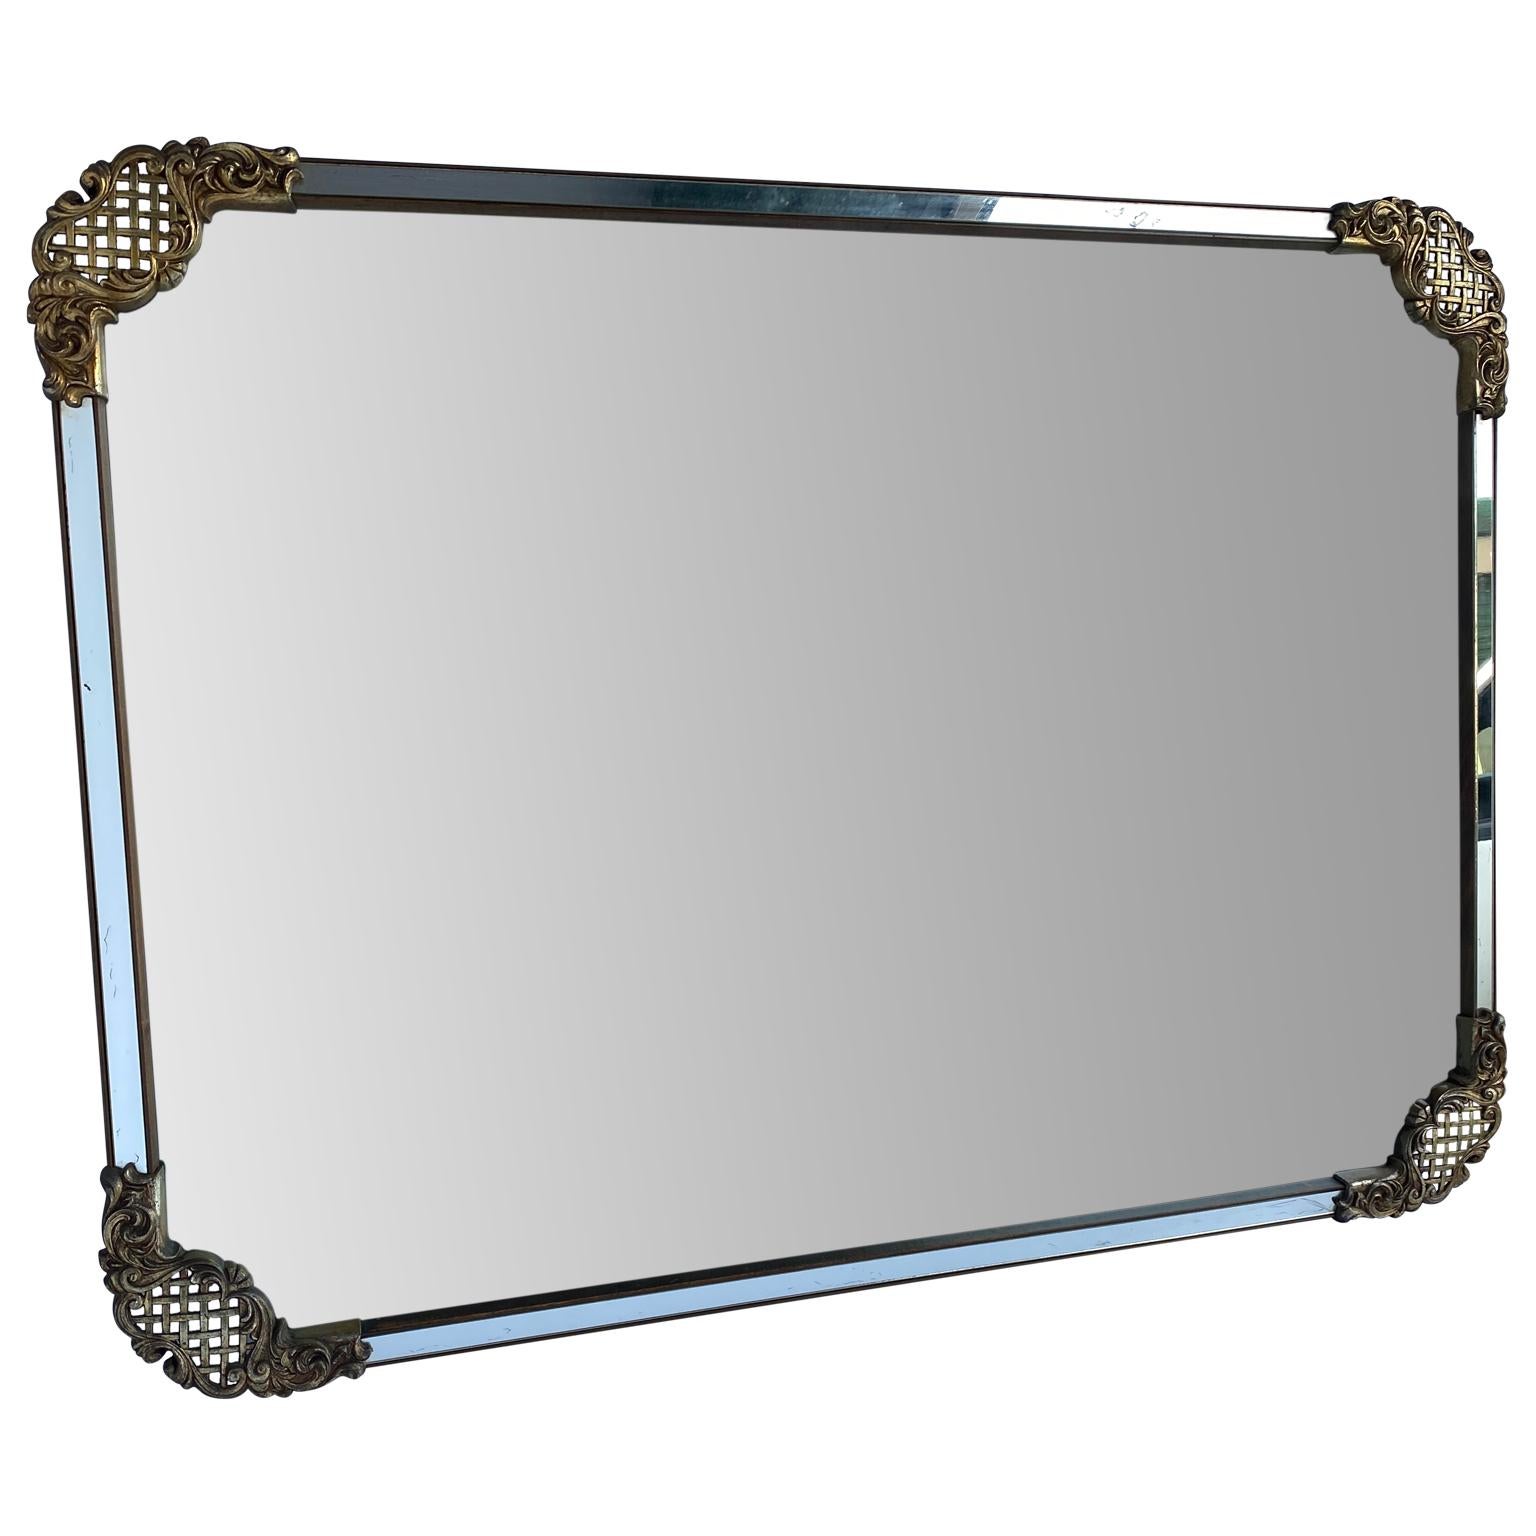 Large rectangular cast iron wall mirror with brass decor on the corners
mirror can hang horizontally or vertically.
 